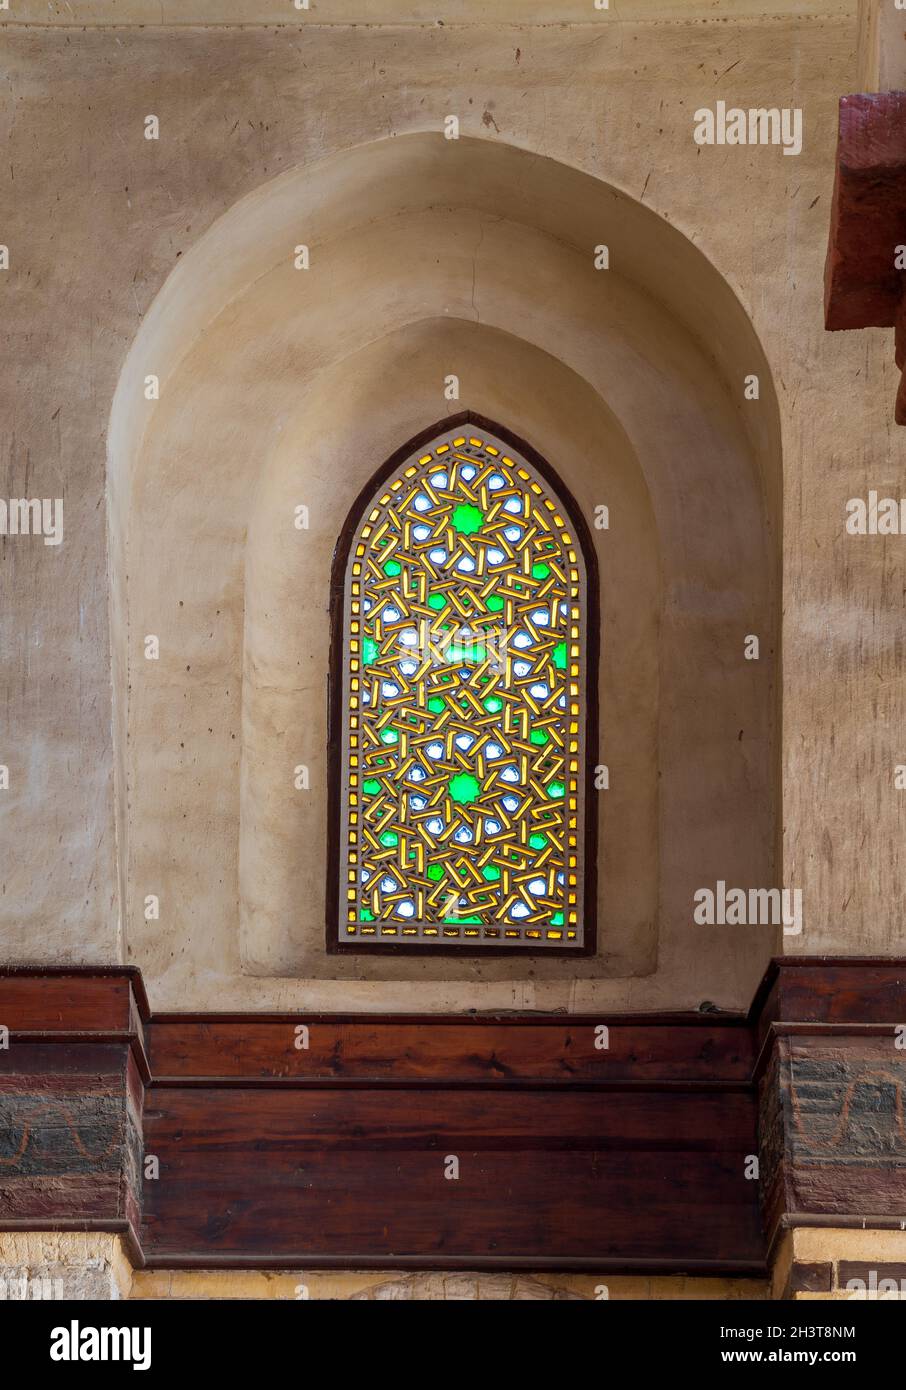 Perforated stucco window decorated with colorful stain glass with geometrical circular patterns and floral patterns, located at Mamluk era public historical Qalawun complex, Moez Street, Cairo, Egypt Stock Photo